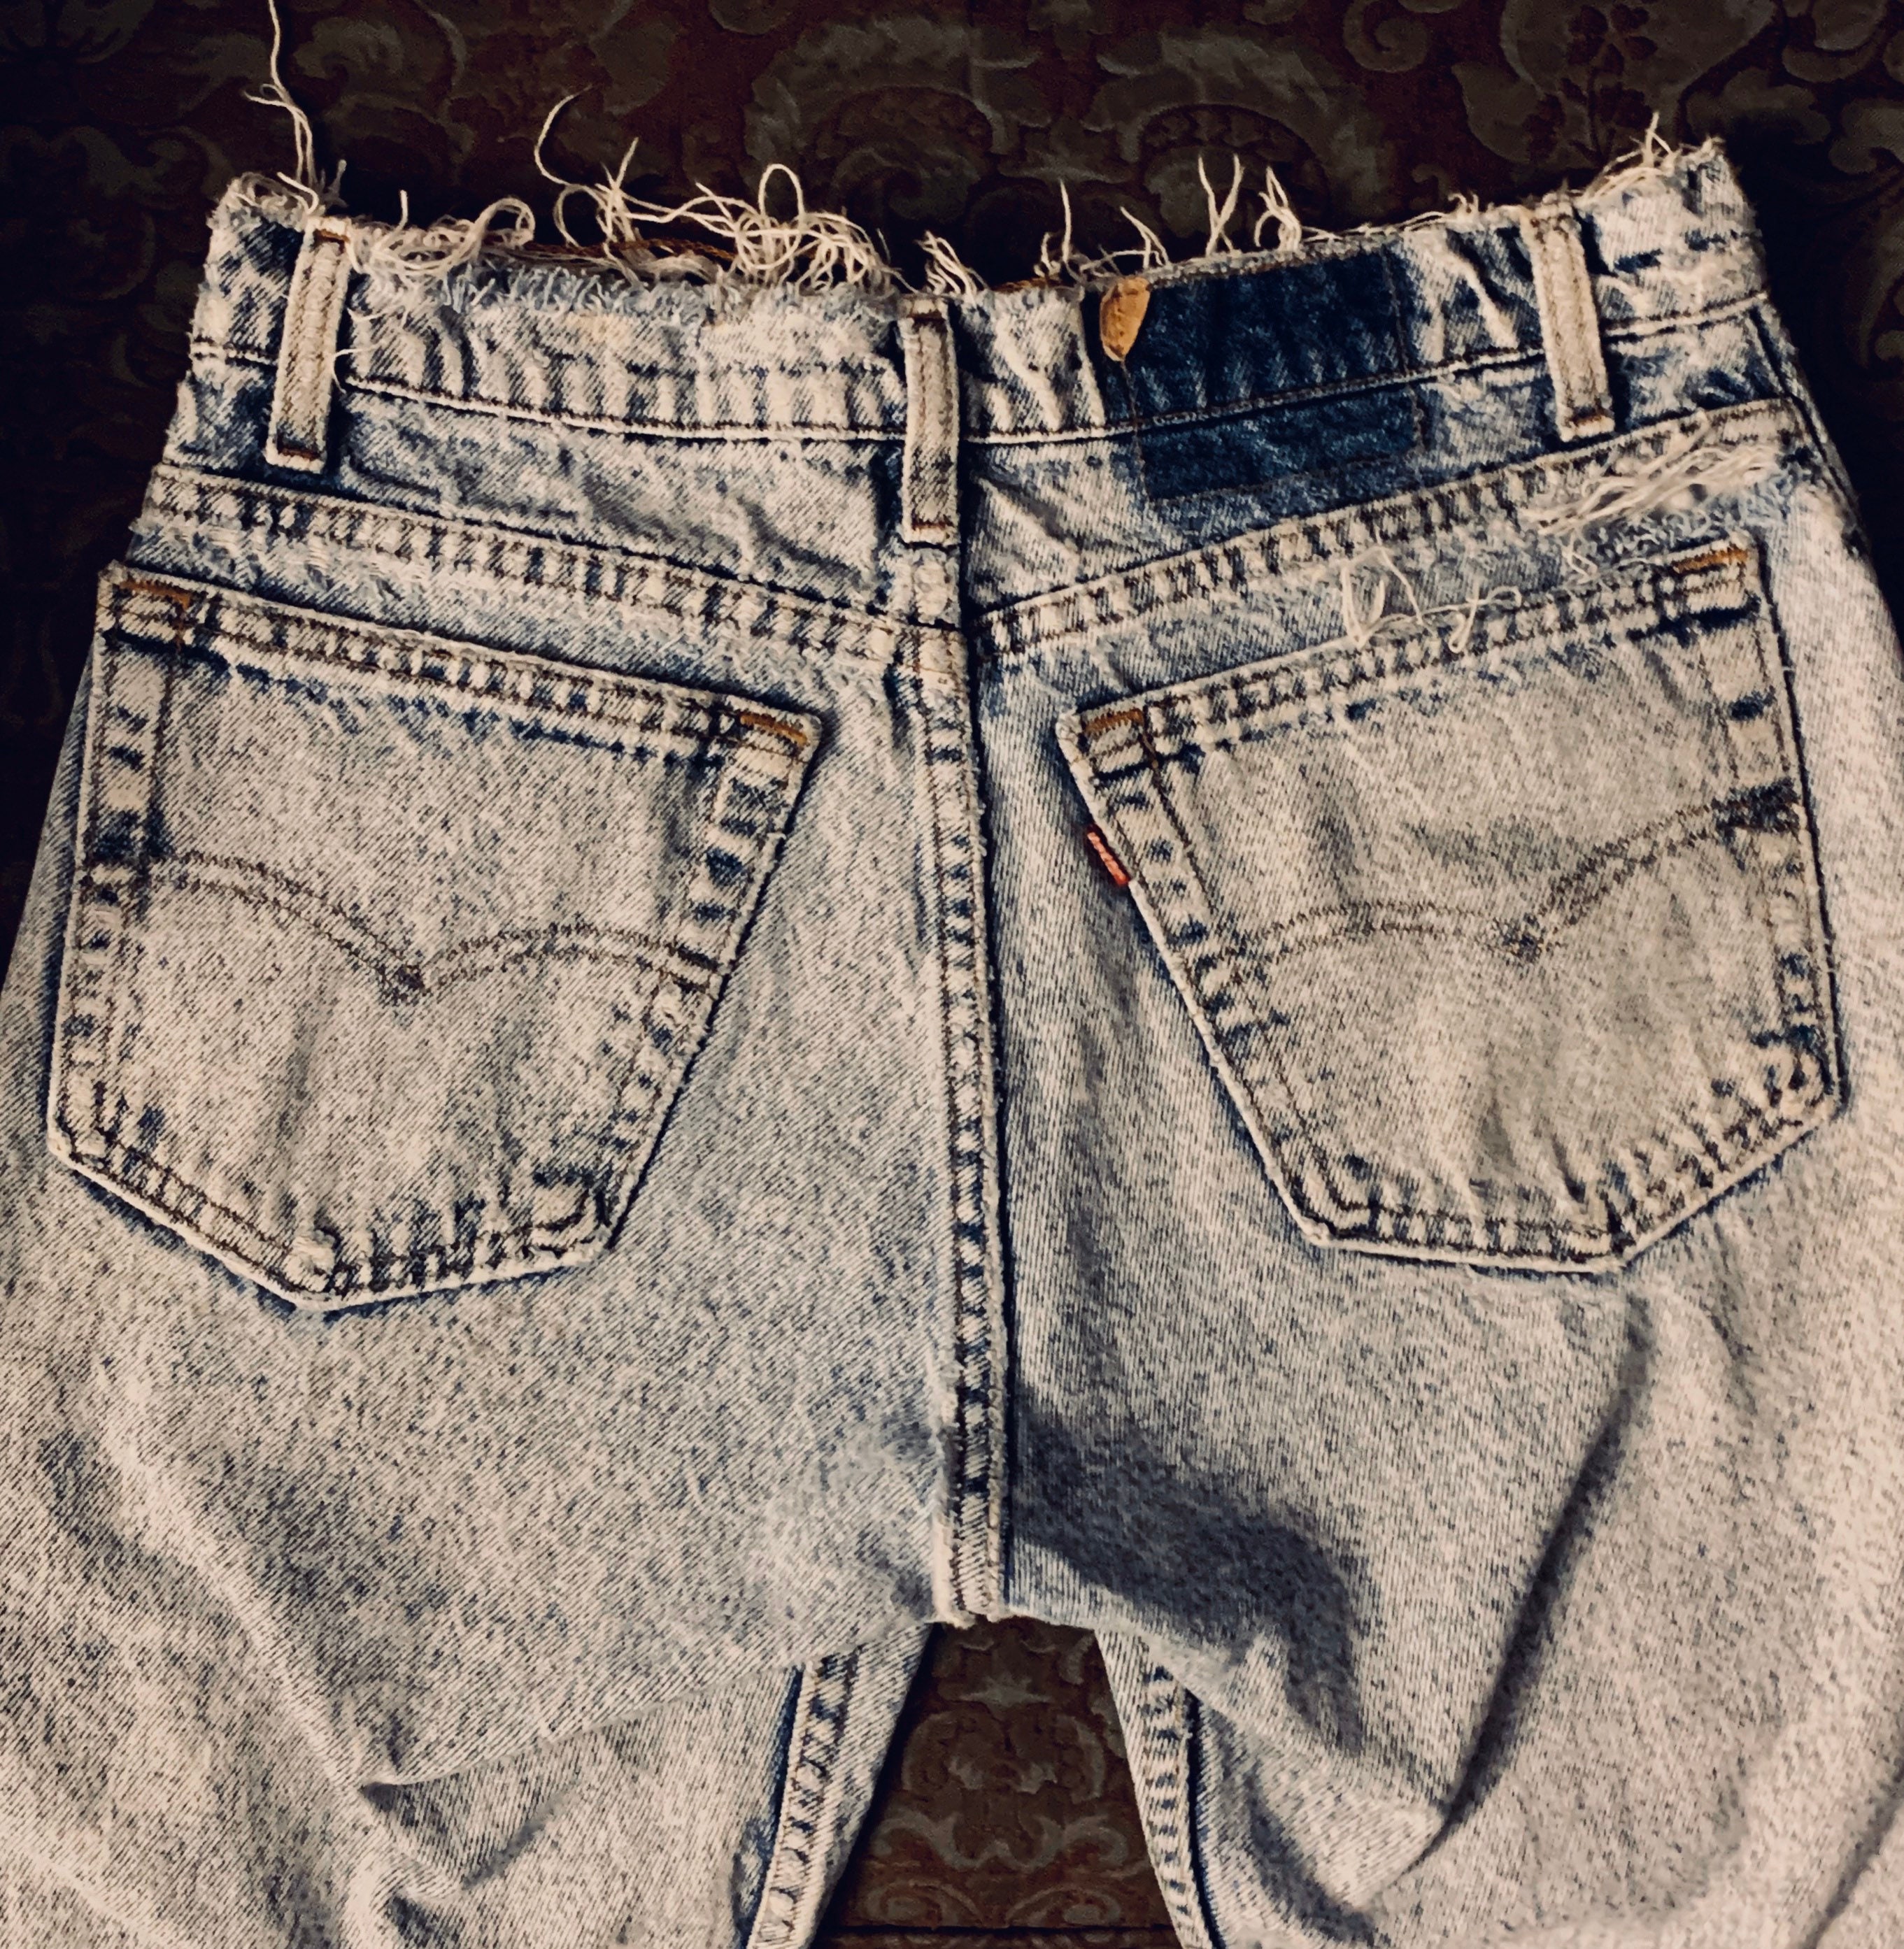 Discontinued Levis - Etsy UK